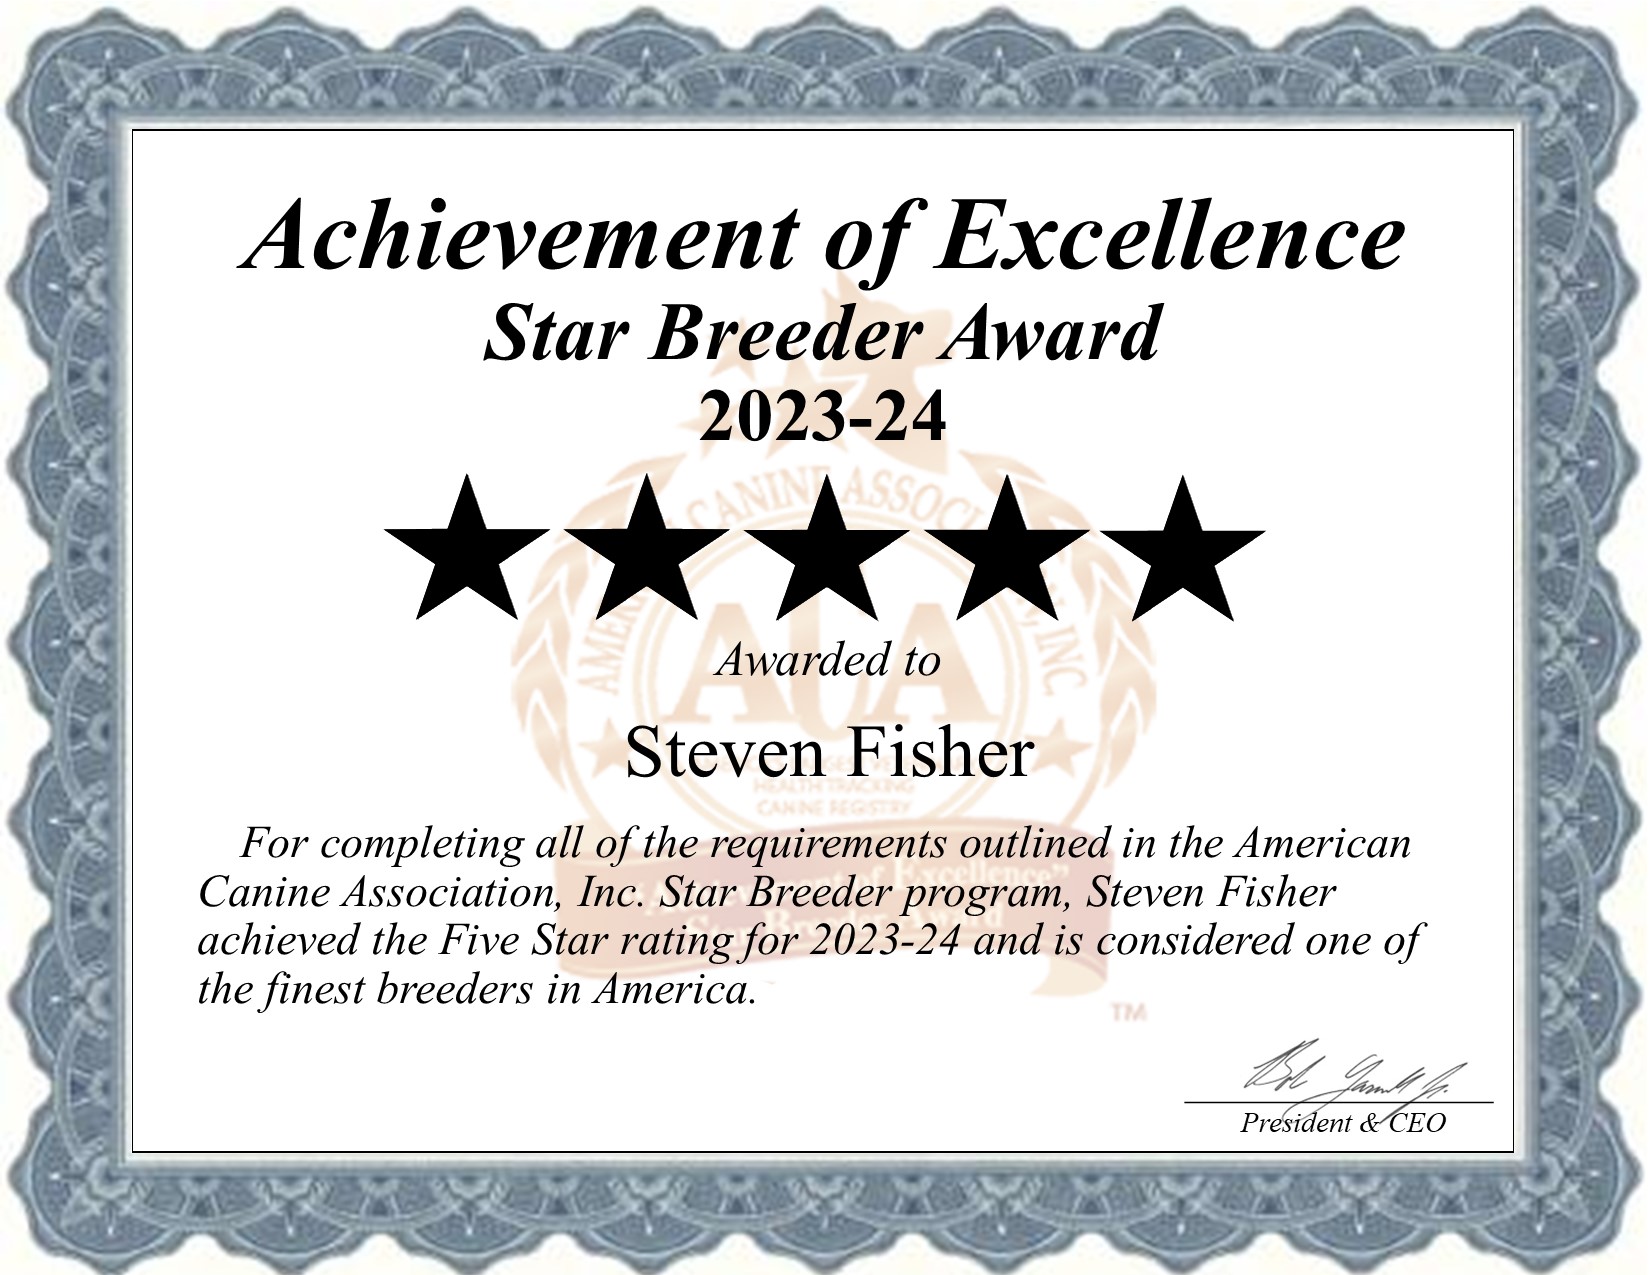 Steven, Fisher, dog, breeder, star, certificate, Steven-Fisher, Morgantown, PA, Pennsylvania, puppy, dog, kennels, mill, puppymill, usda, 5-star, aca, ica, registered, Miniature Poodle, none